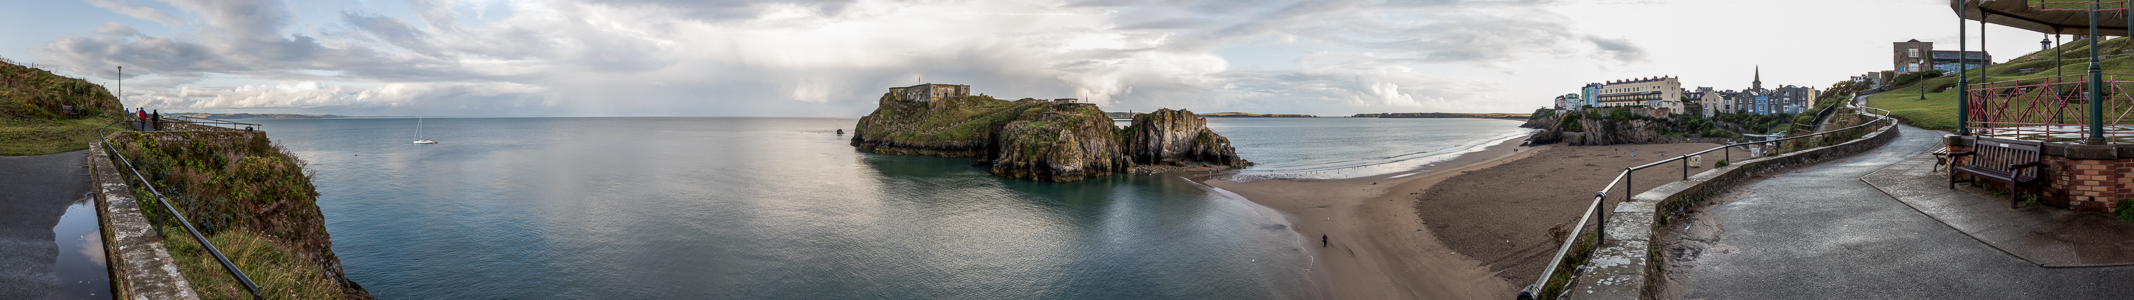 Tenby Castle Hill, St Catherine's Island mit St Catherine's Fort, Castle Beach, Castle Hill